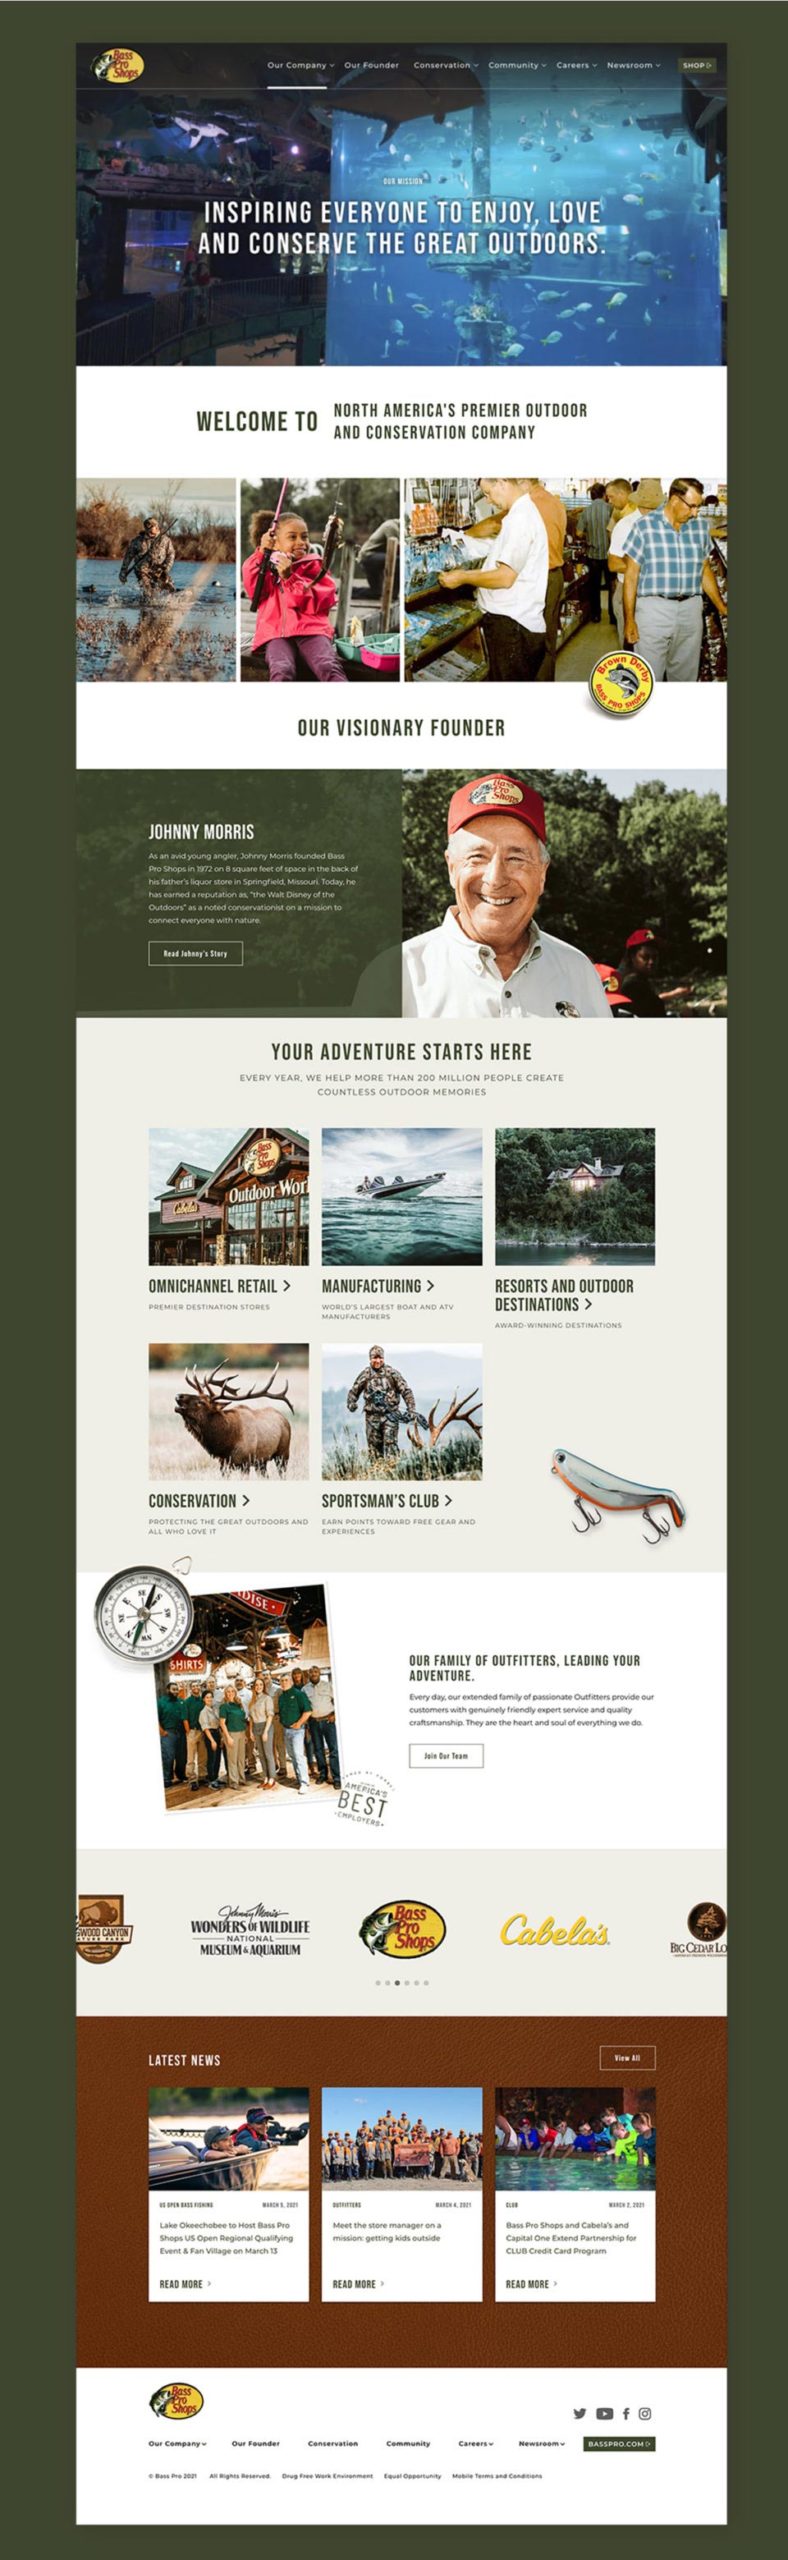 The Bass Pro Shops website design brand section homepage